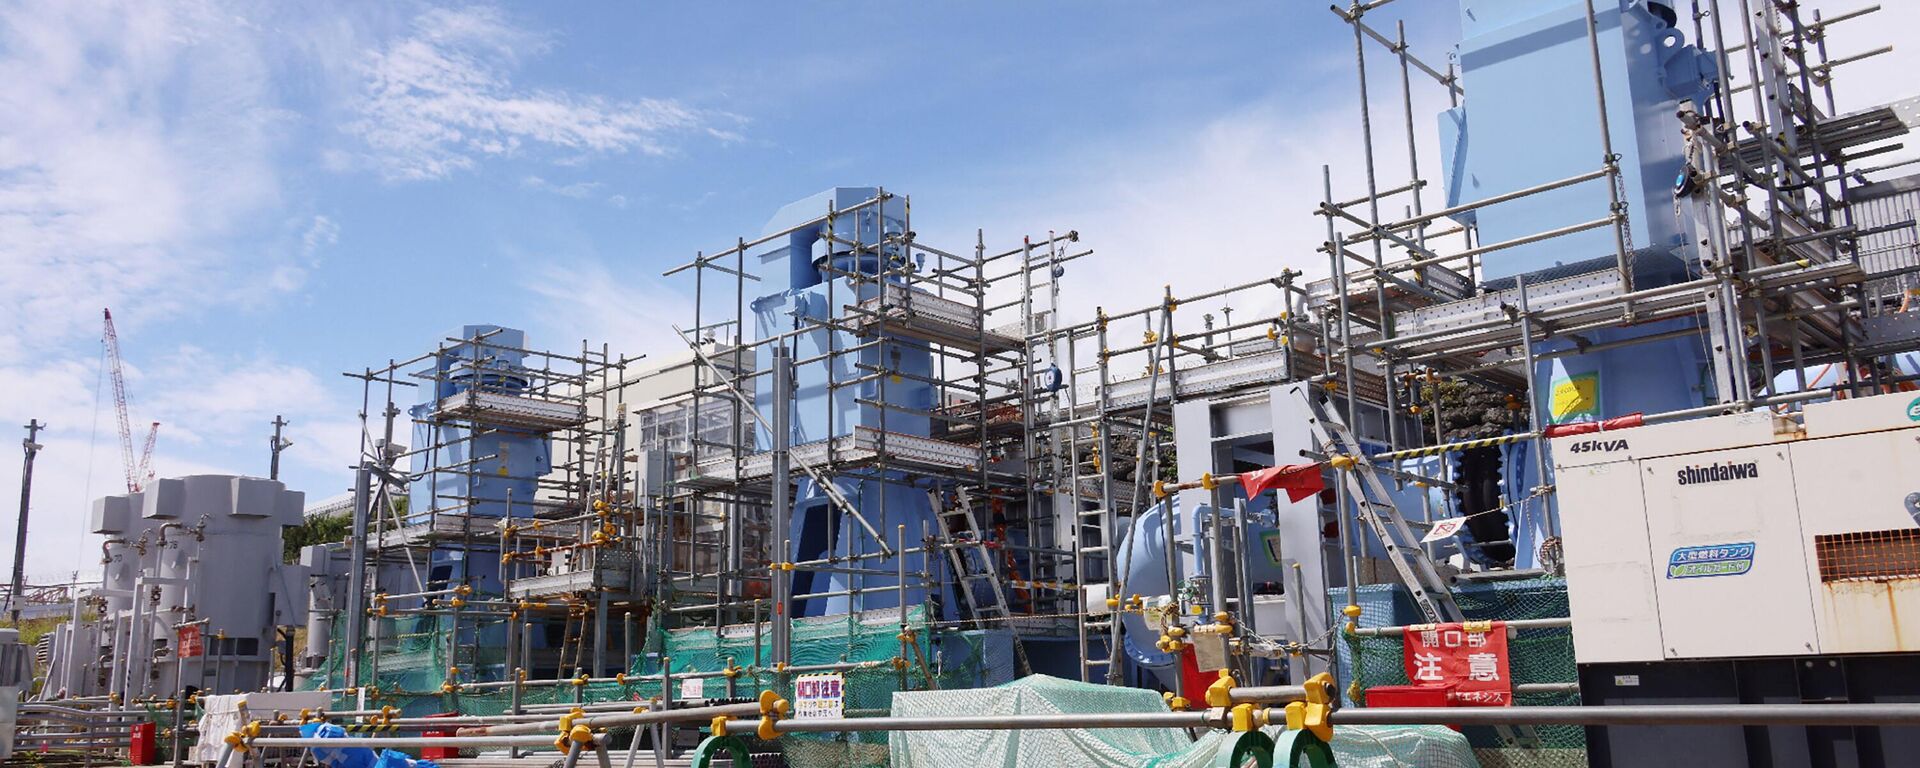 A facility that pumps up seawater to dilute the treated water is pictured at Tokyo Electric Power Company Holdings Inc. (TEPCO) Fukushima Daiichi Nuclear Power Plant in Okuma, Fukushima prefecture on August 27, 2023 - Sputnik International, 1920, 02.11.2023